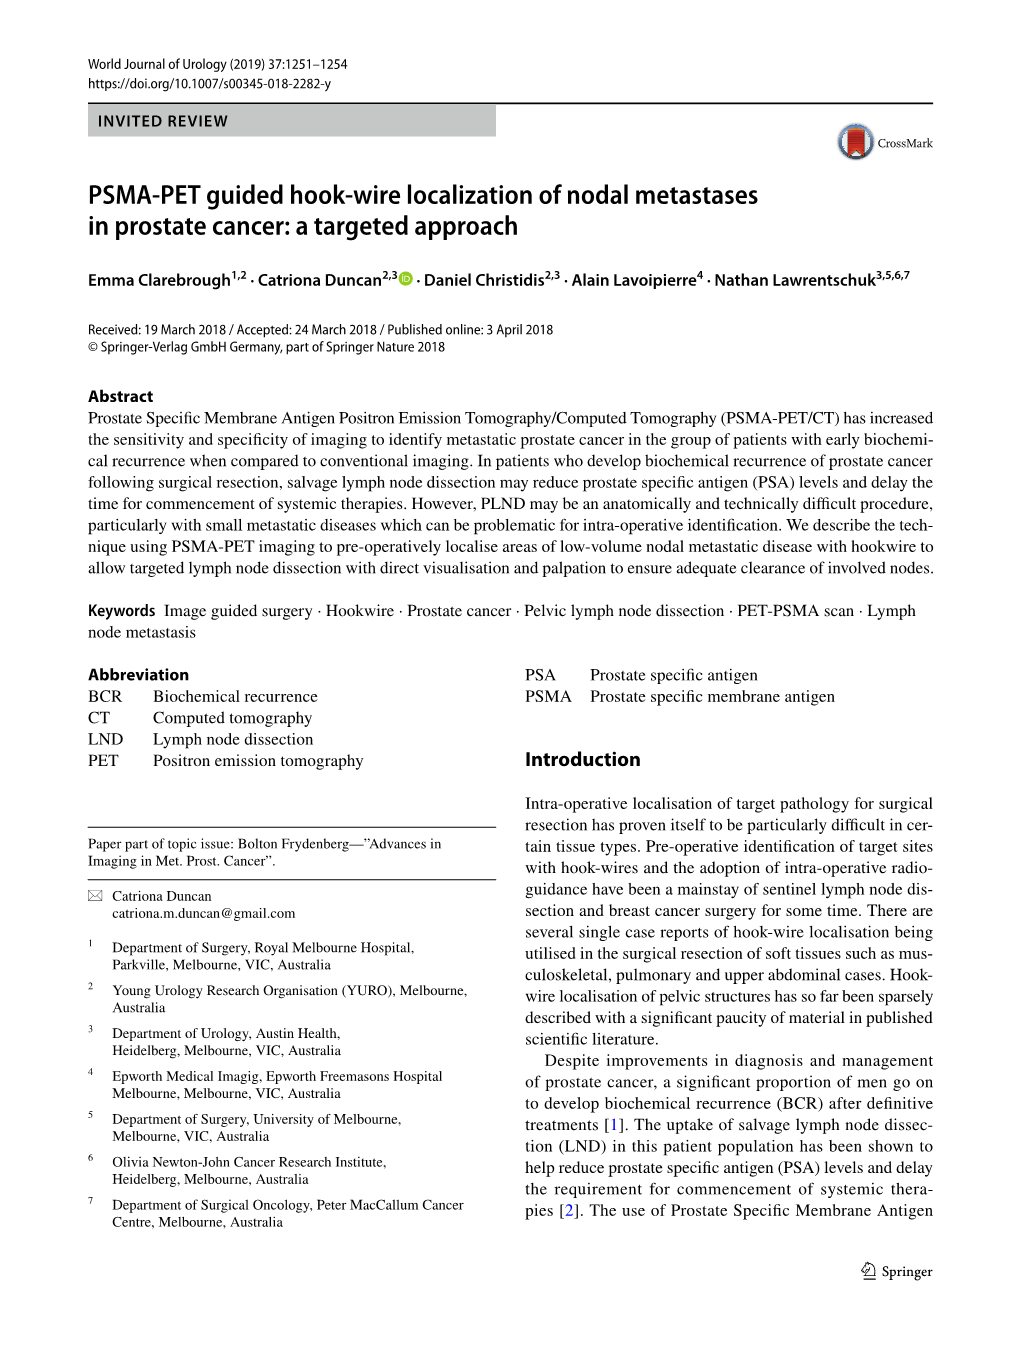 PSMA-PET Guided Hook-Wire Localization of Nodal Metastases In